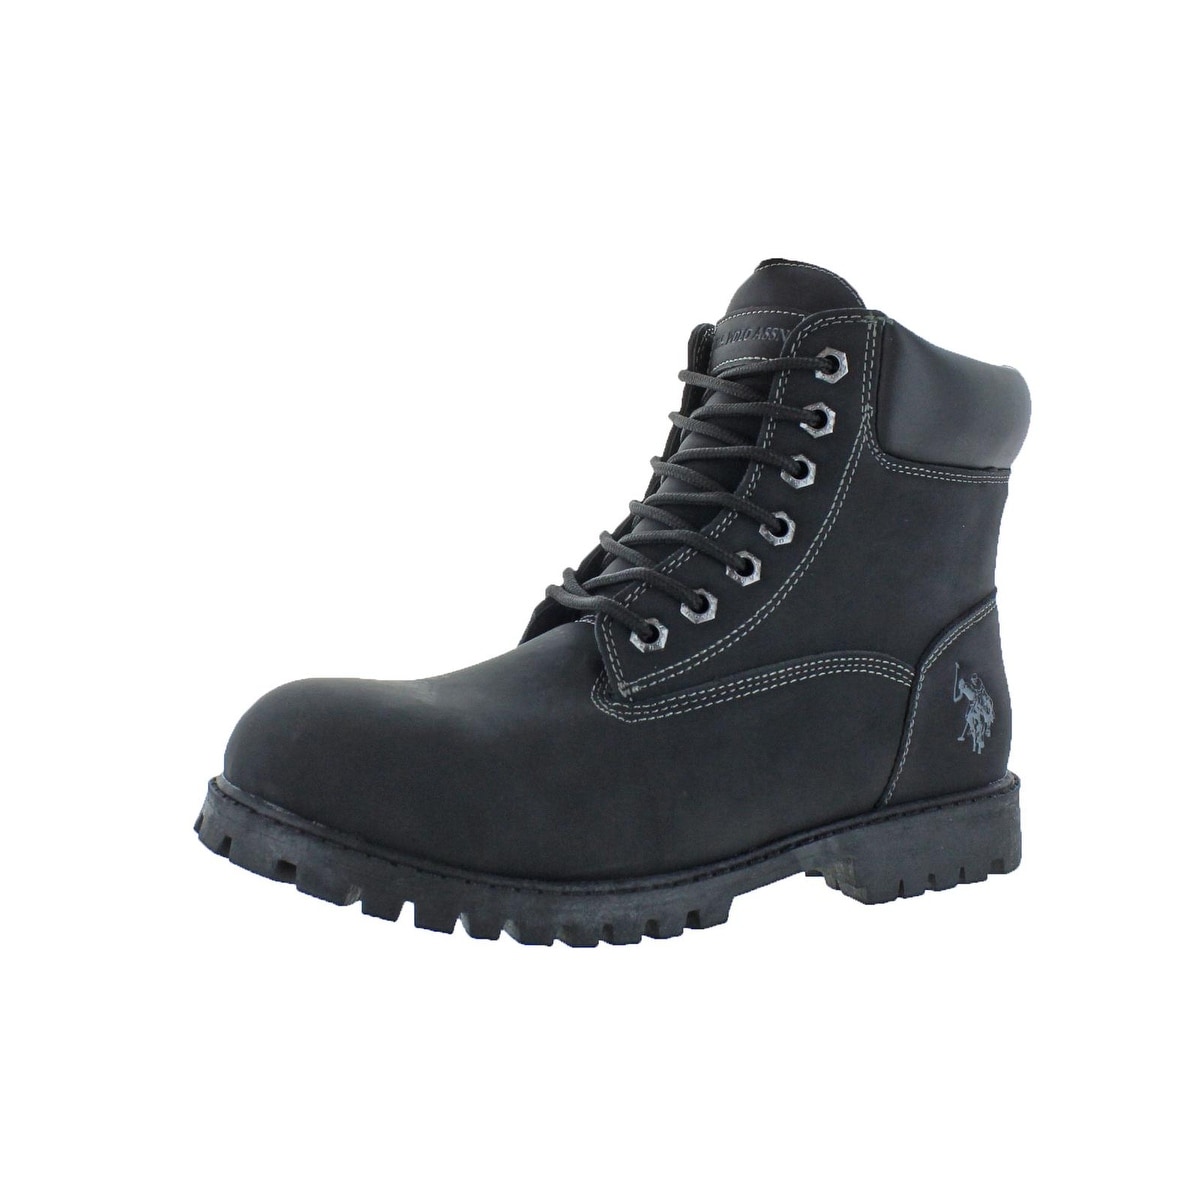 polo steel toe work boots